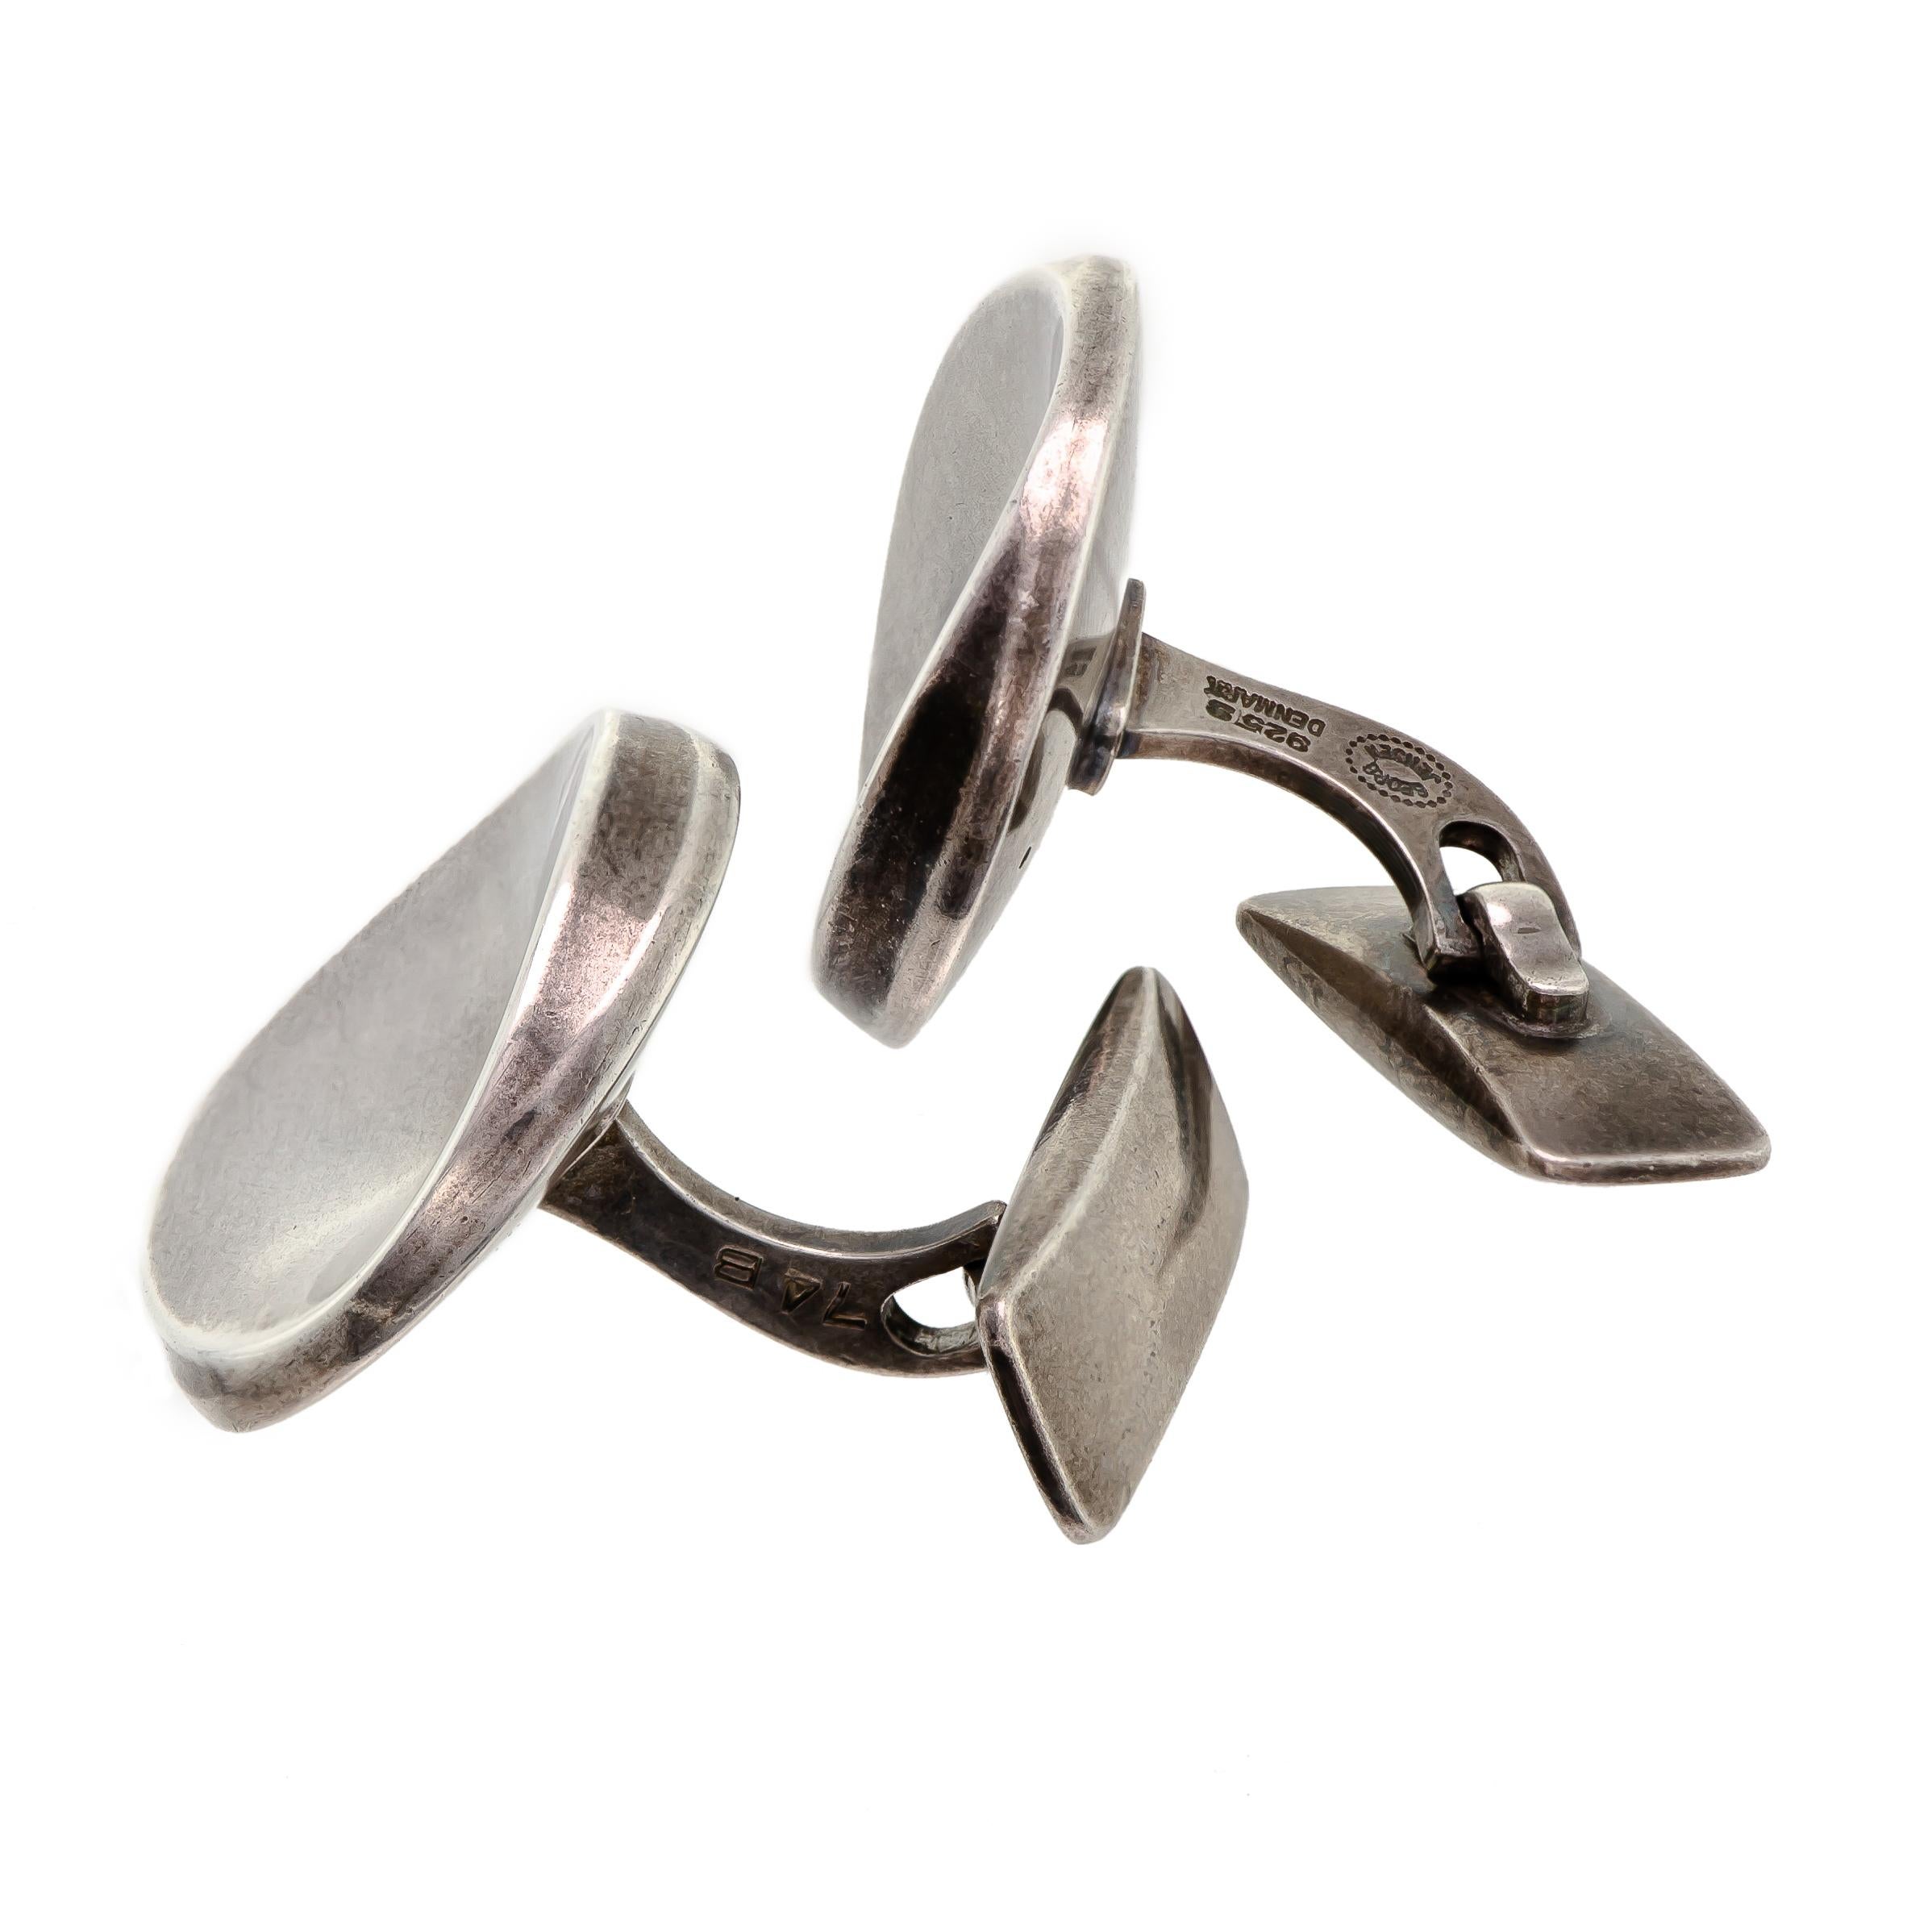 These Georg Jensen cufflinks are a stunning example of mid-century design. Made of high-quality sterling silver, they were crafted in Denmark during the 1960s and feature a unique bowed convex organic form. The dotted outline Georg Jensen, 925S